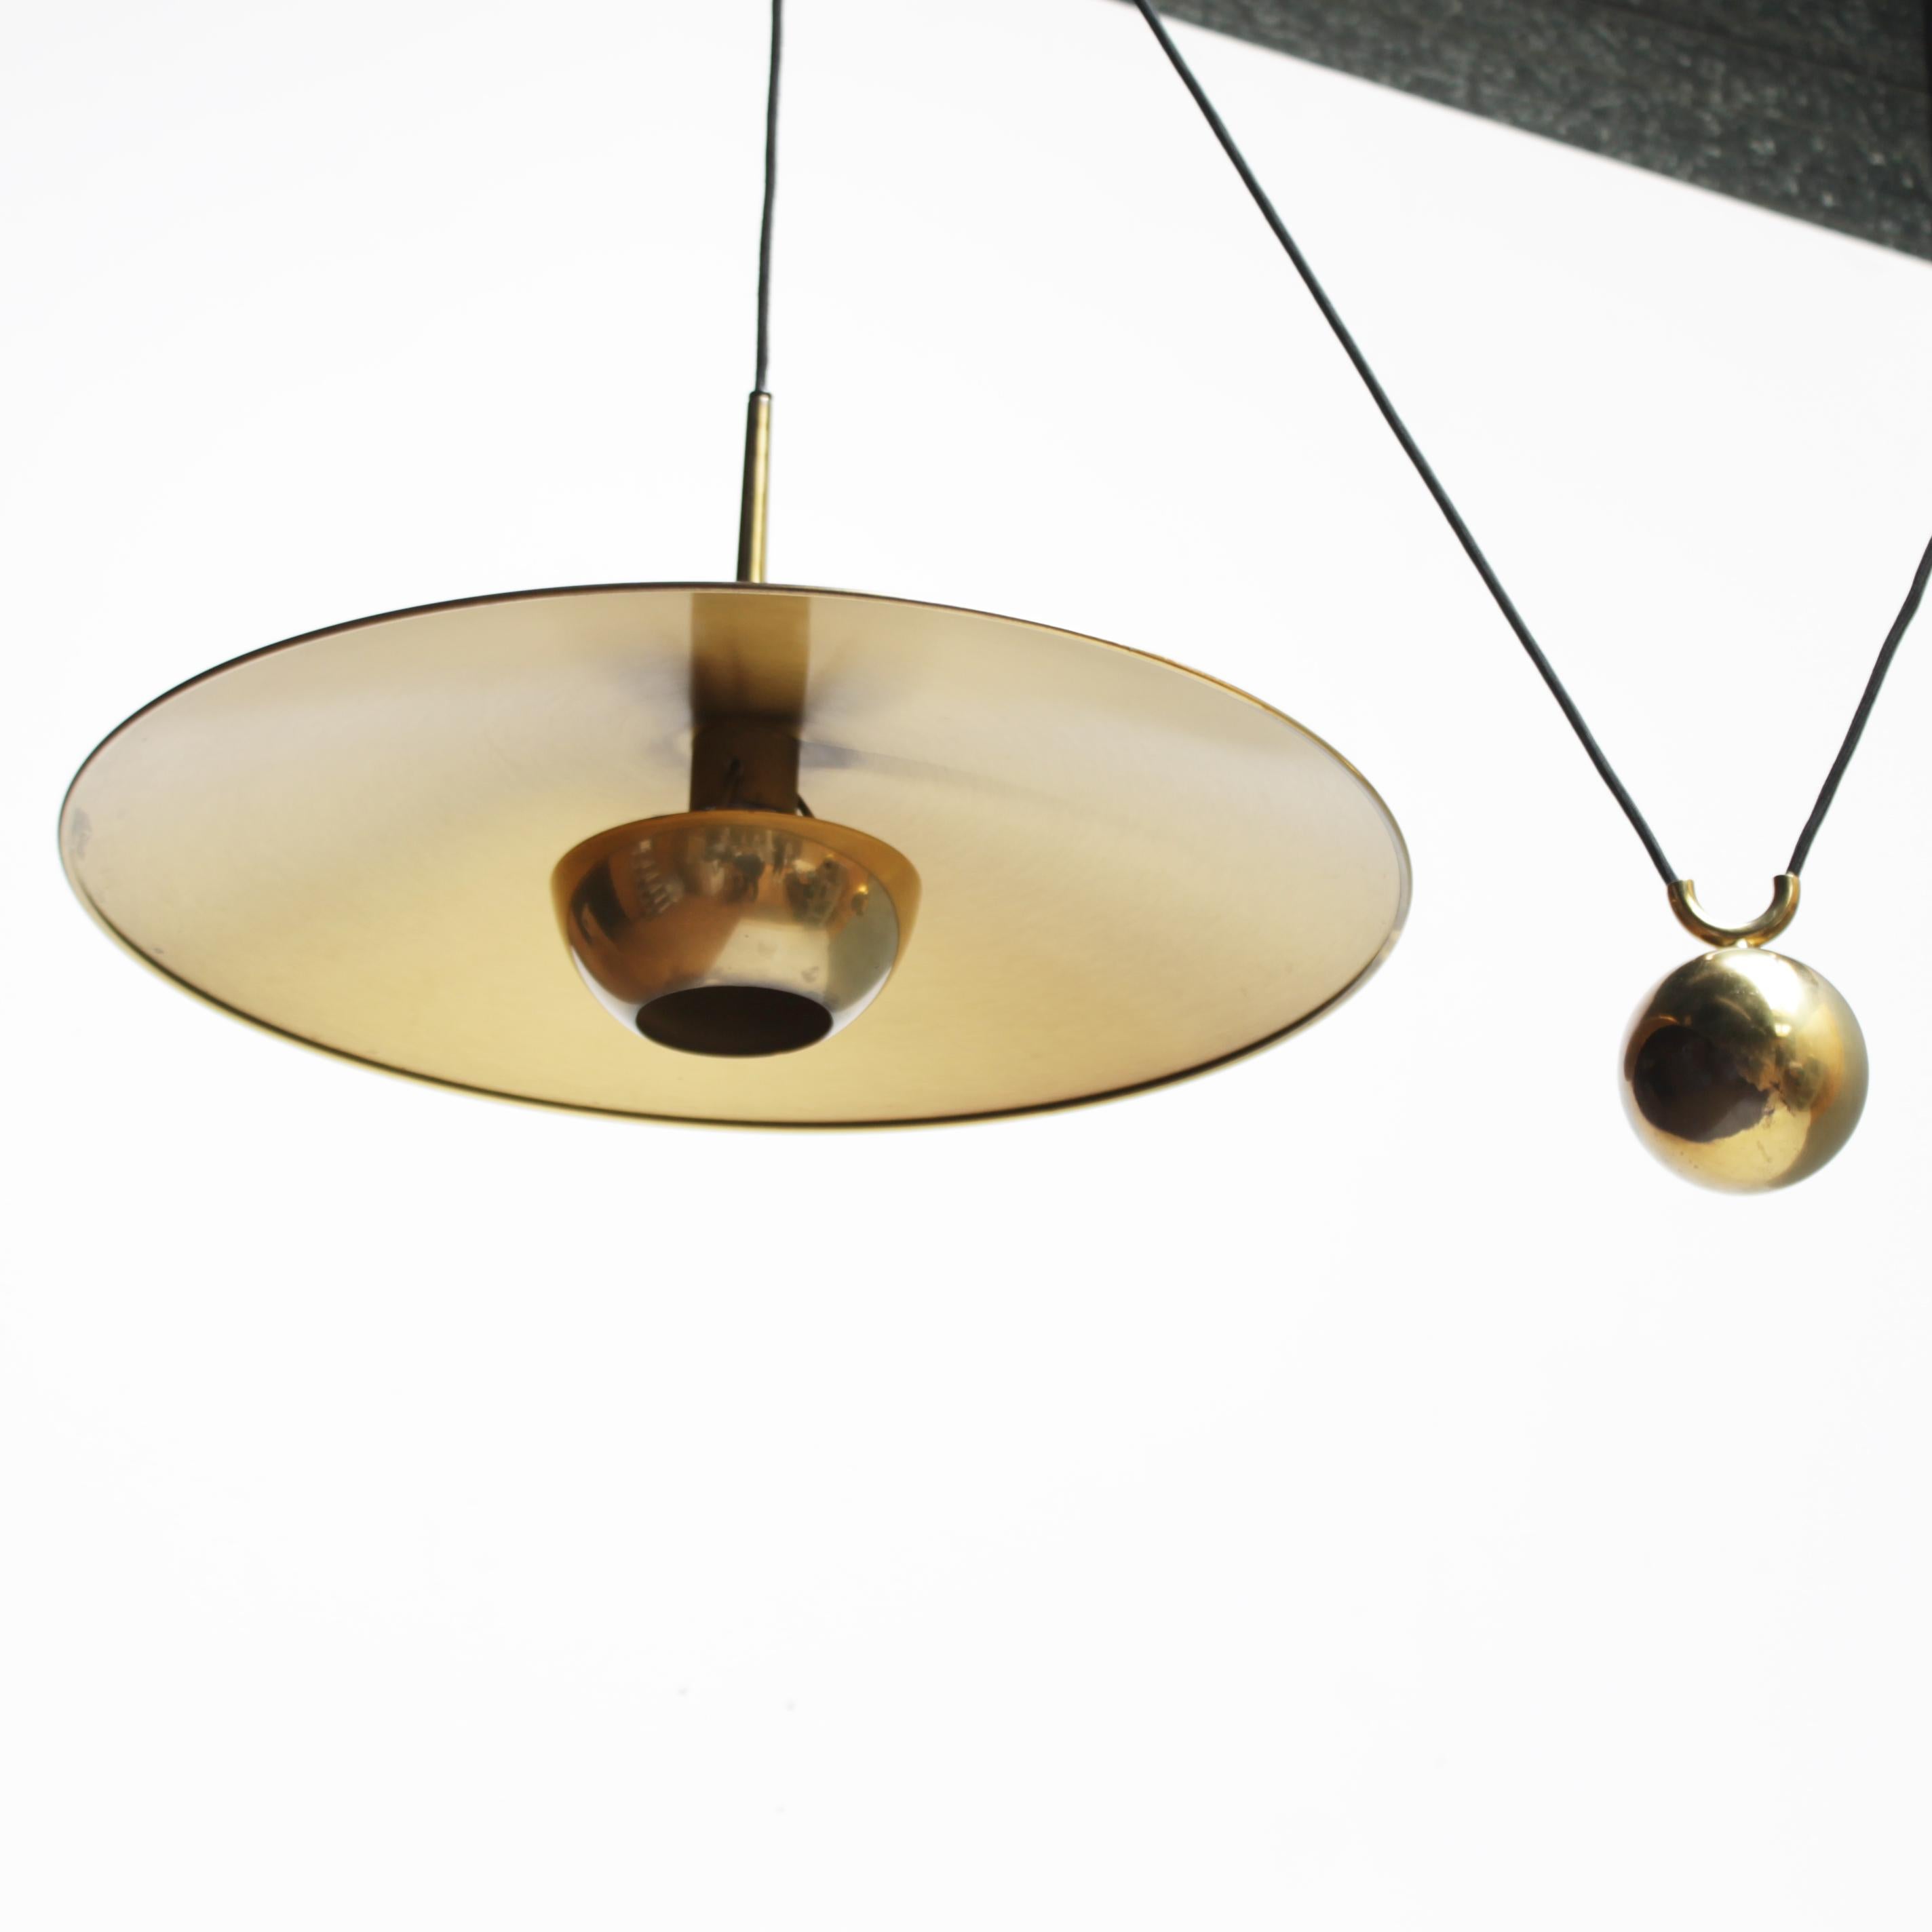 Late 20th Century Vintage Brass Counterweight Pendant 'Onos 55' by Florian Schulz, Germany